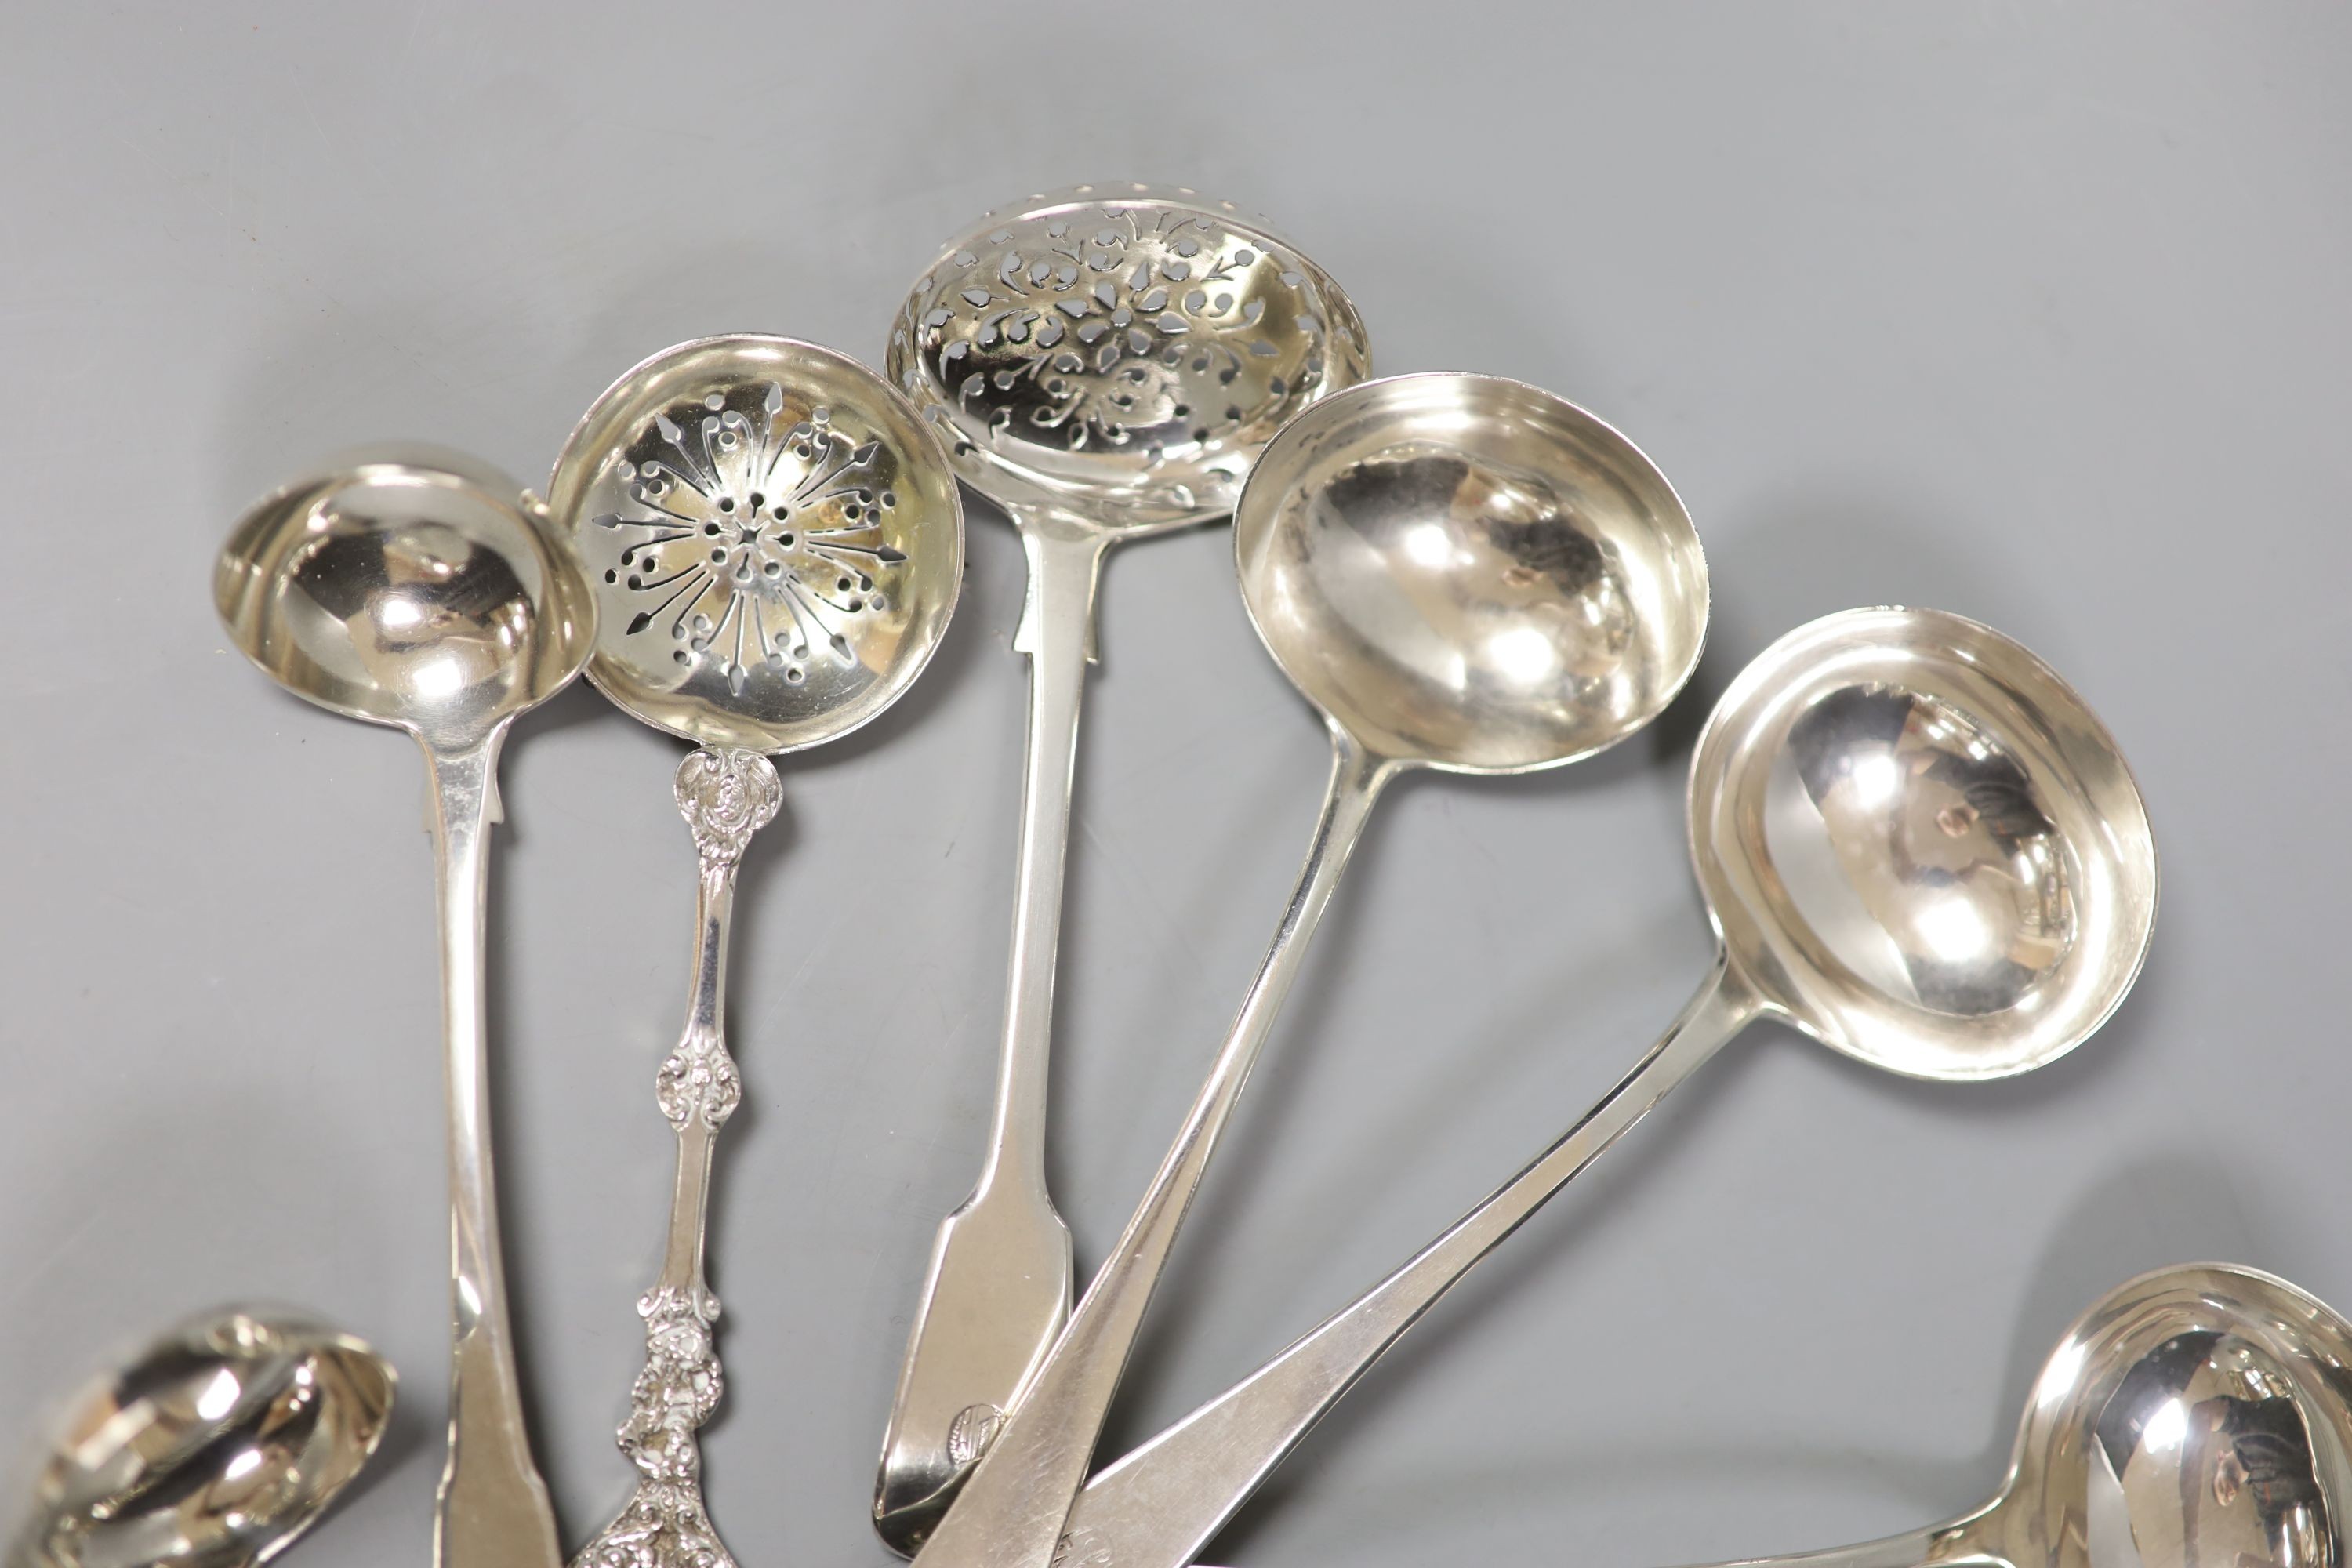 Eleven assorted 19th century and later silver suace and sifter ladles, various dates and makers, 13.5oz.